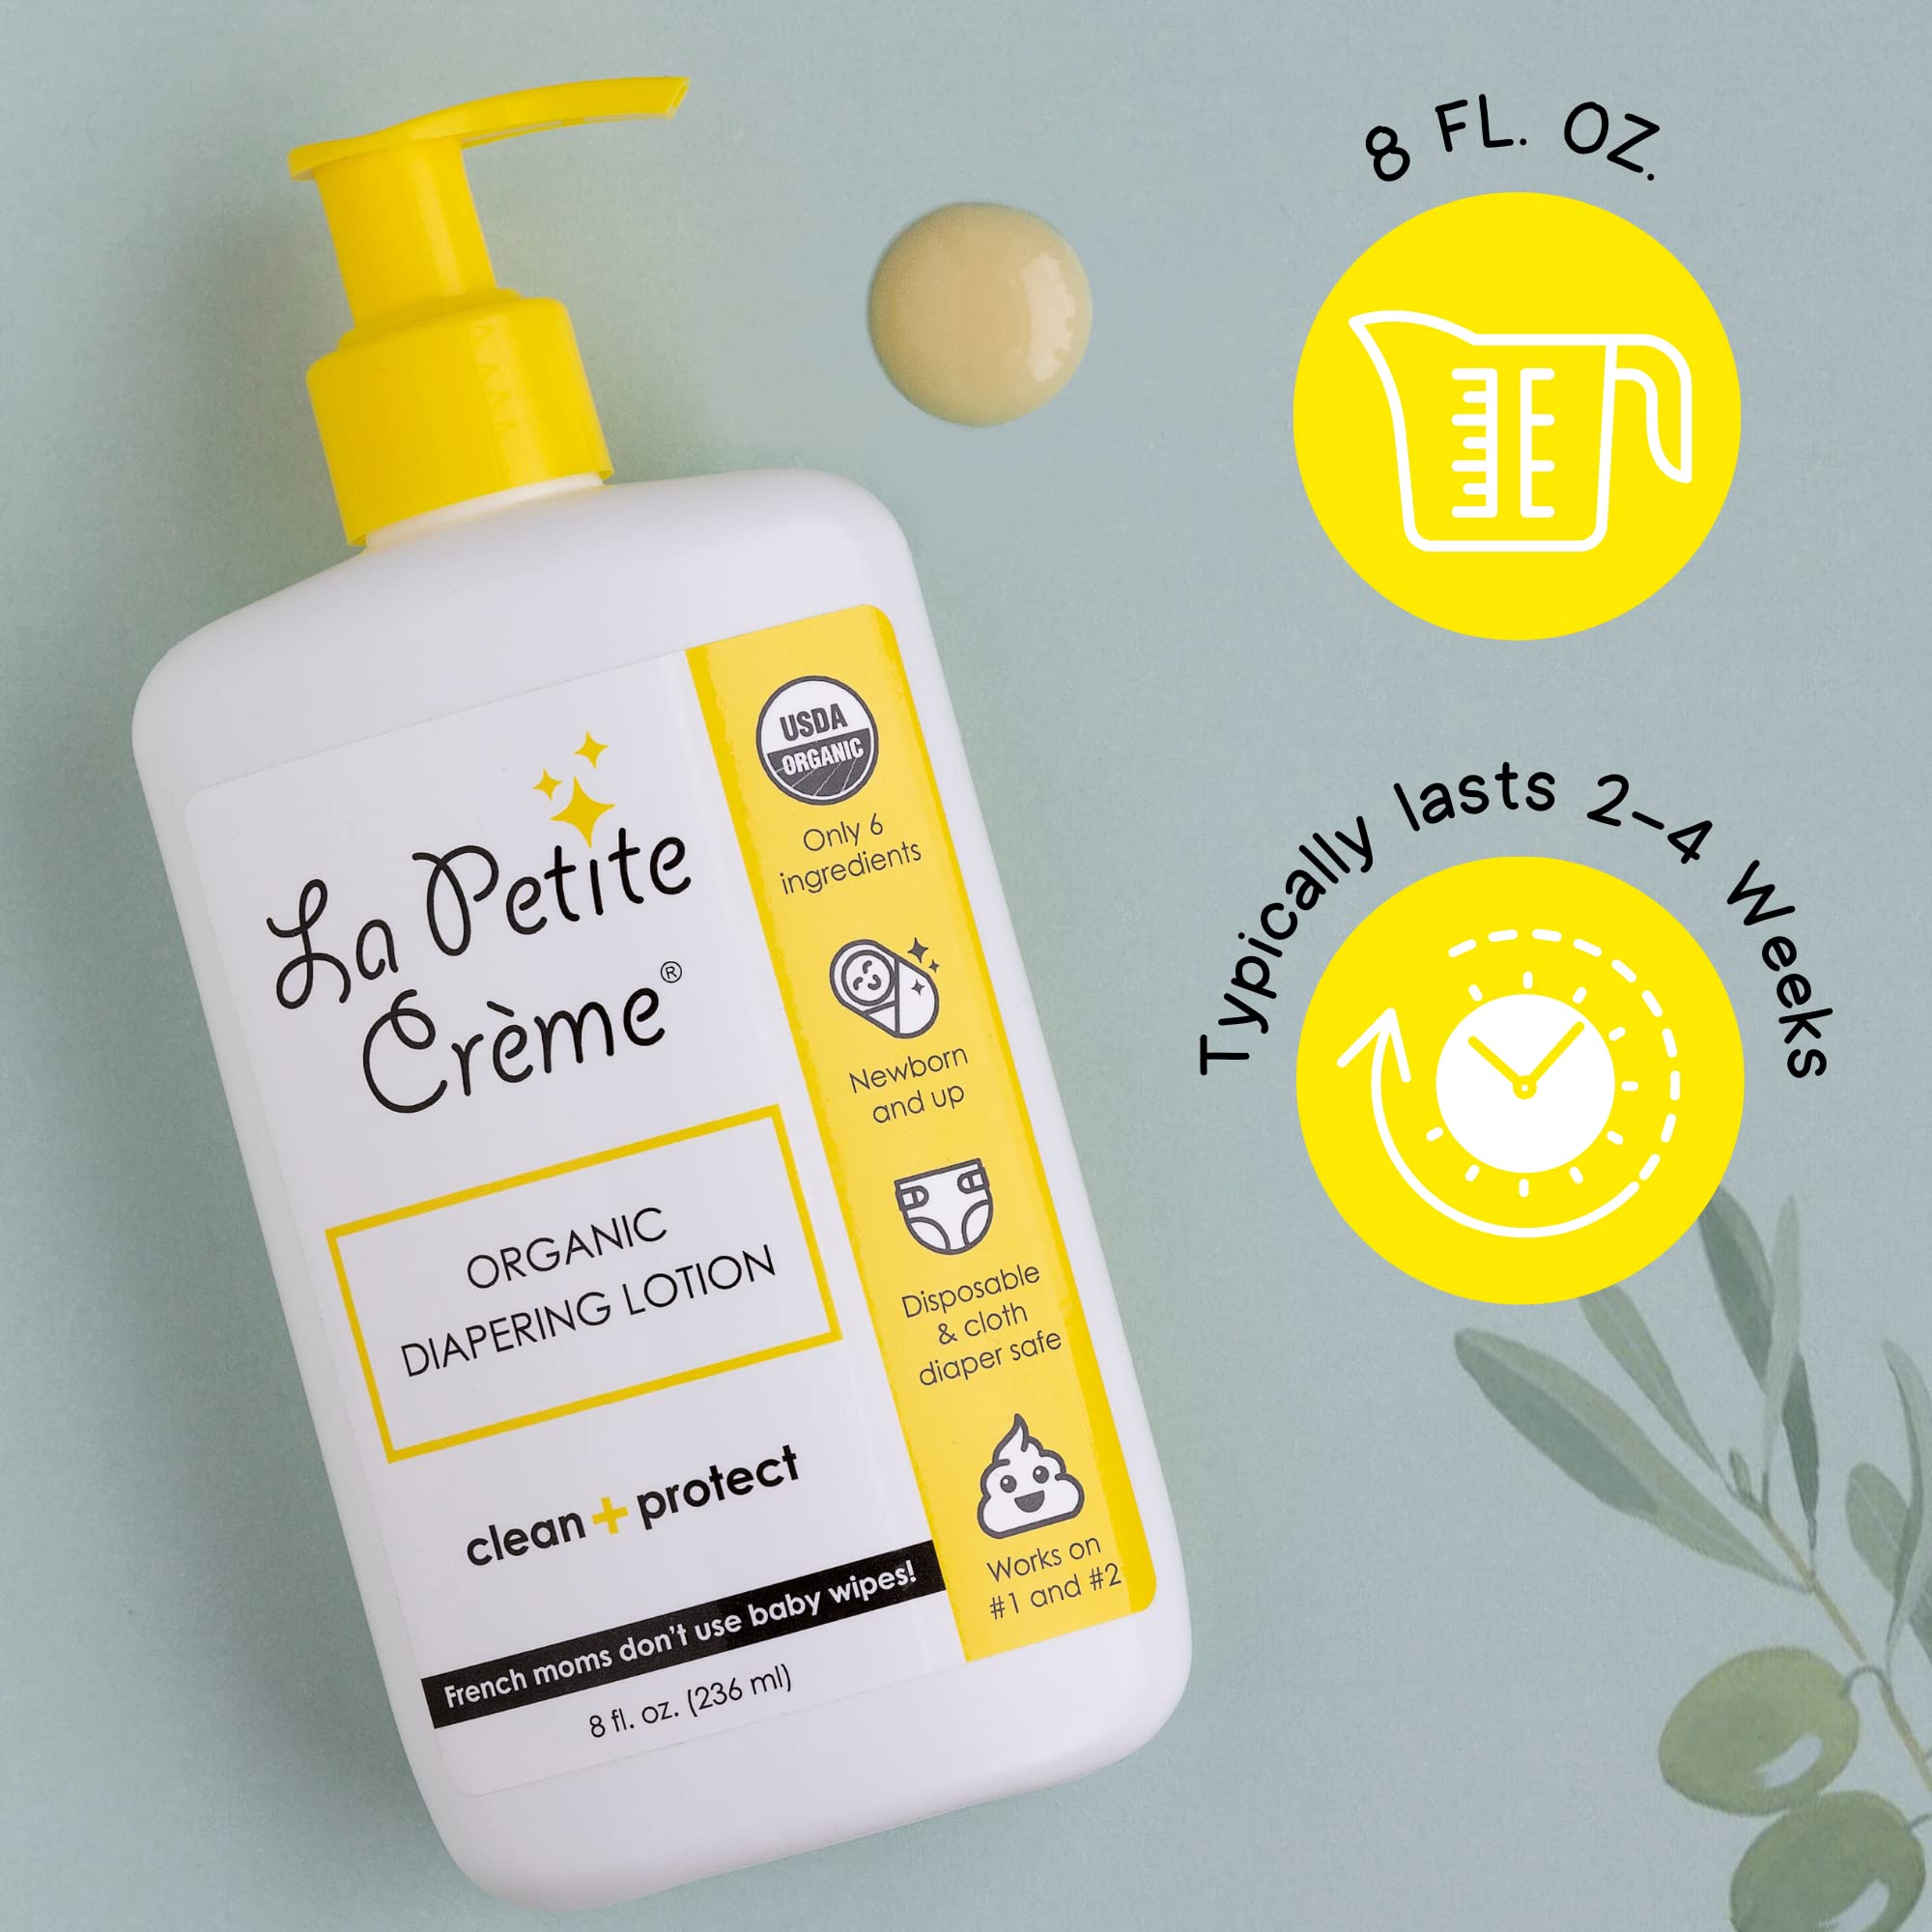 La Petite Creme French All-Natural Diapering Lotion - Diaper Cream Alternative to Baby Wipes - Gentle Moisturizer & Skin Cleanser with USDA Certified Organic Ingredients - Baby Essentials (8 oz)